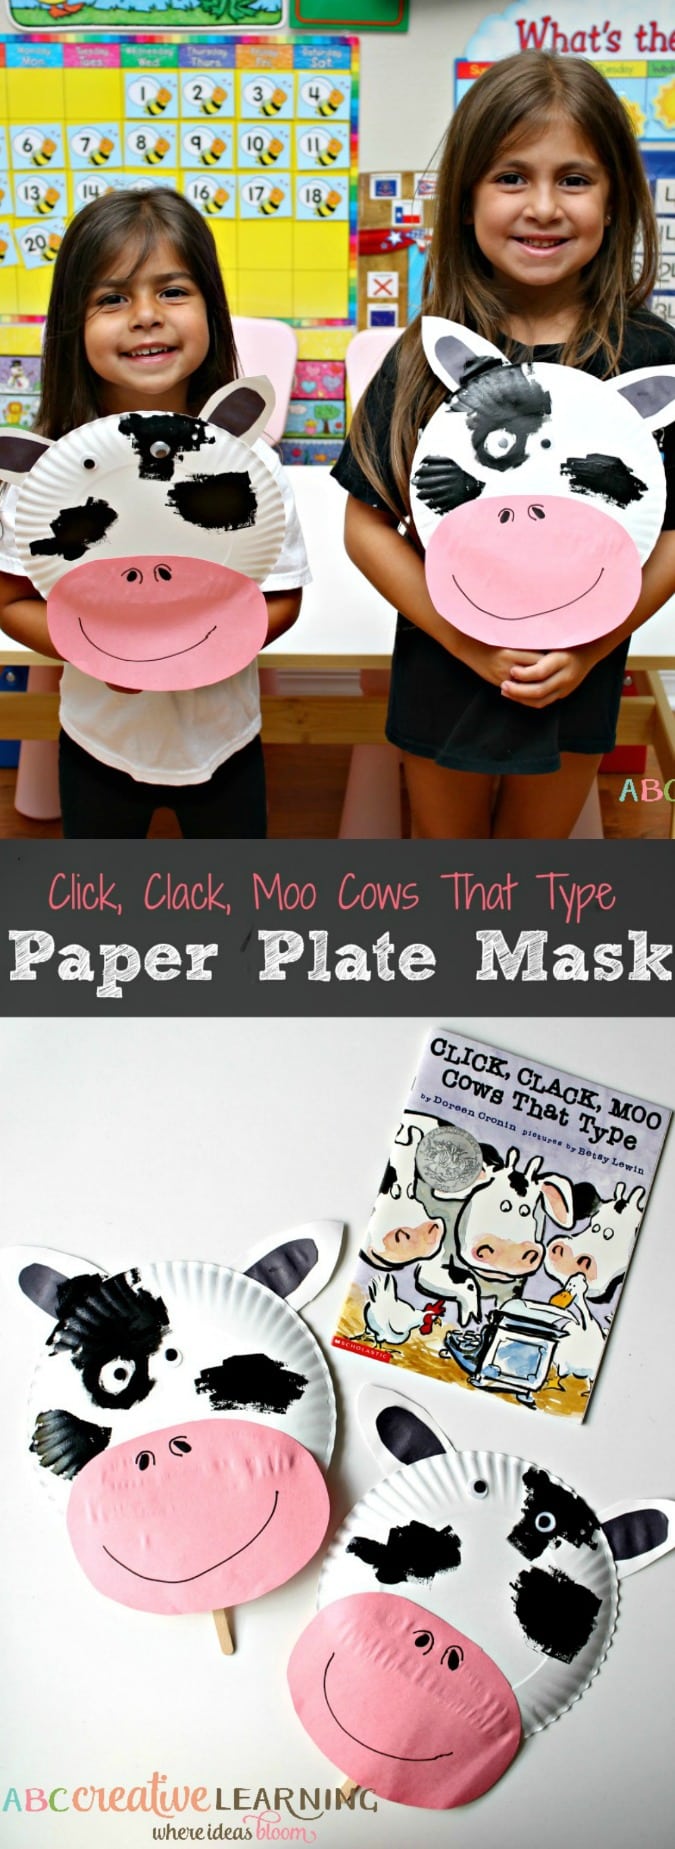 Click, Clack, Moo Cows That Type Cow Paper Plate Mask